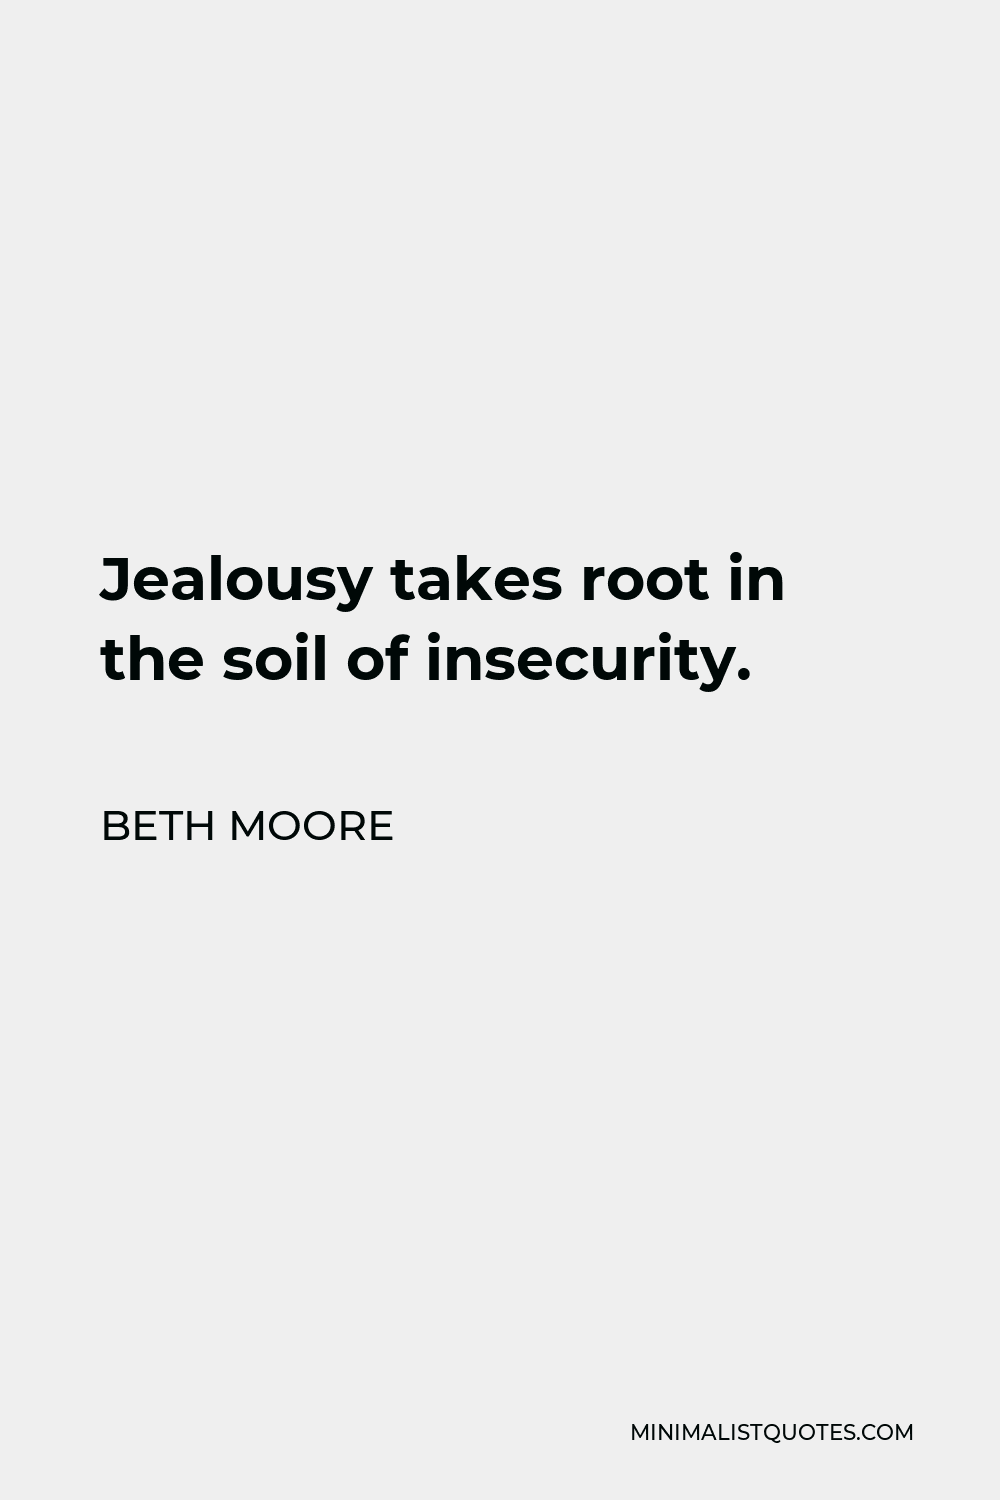 Beth Moore Quote - Jealousy takes root in the soil of insecurity.